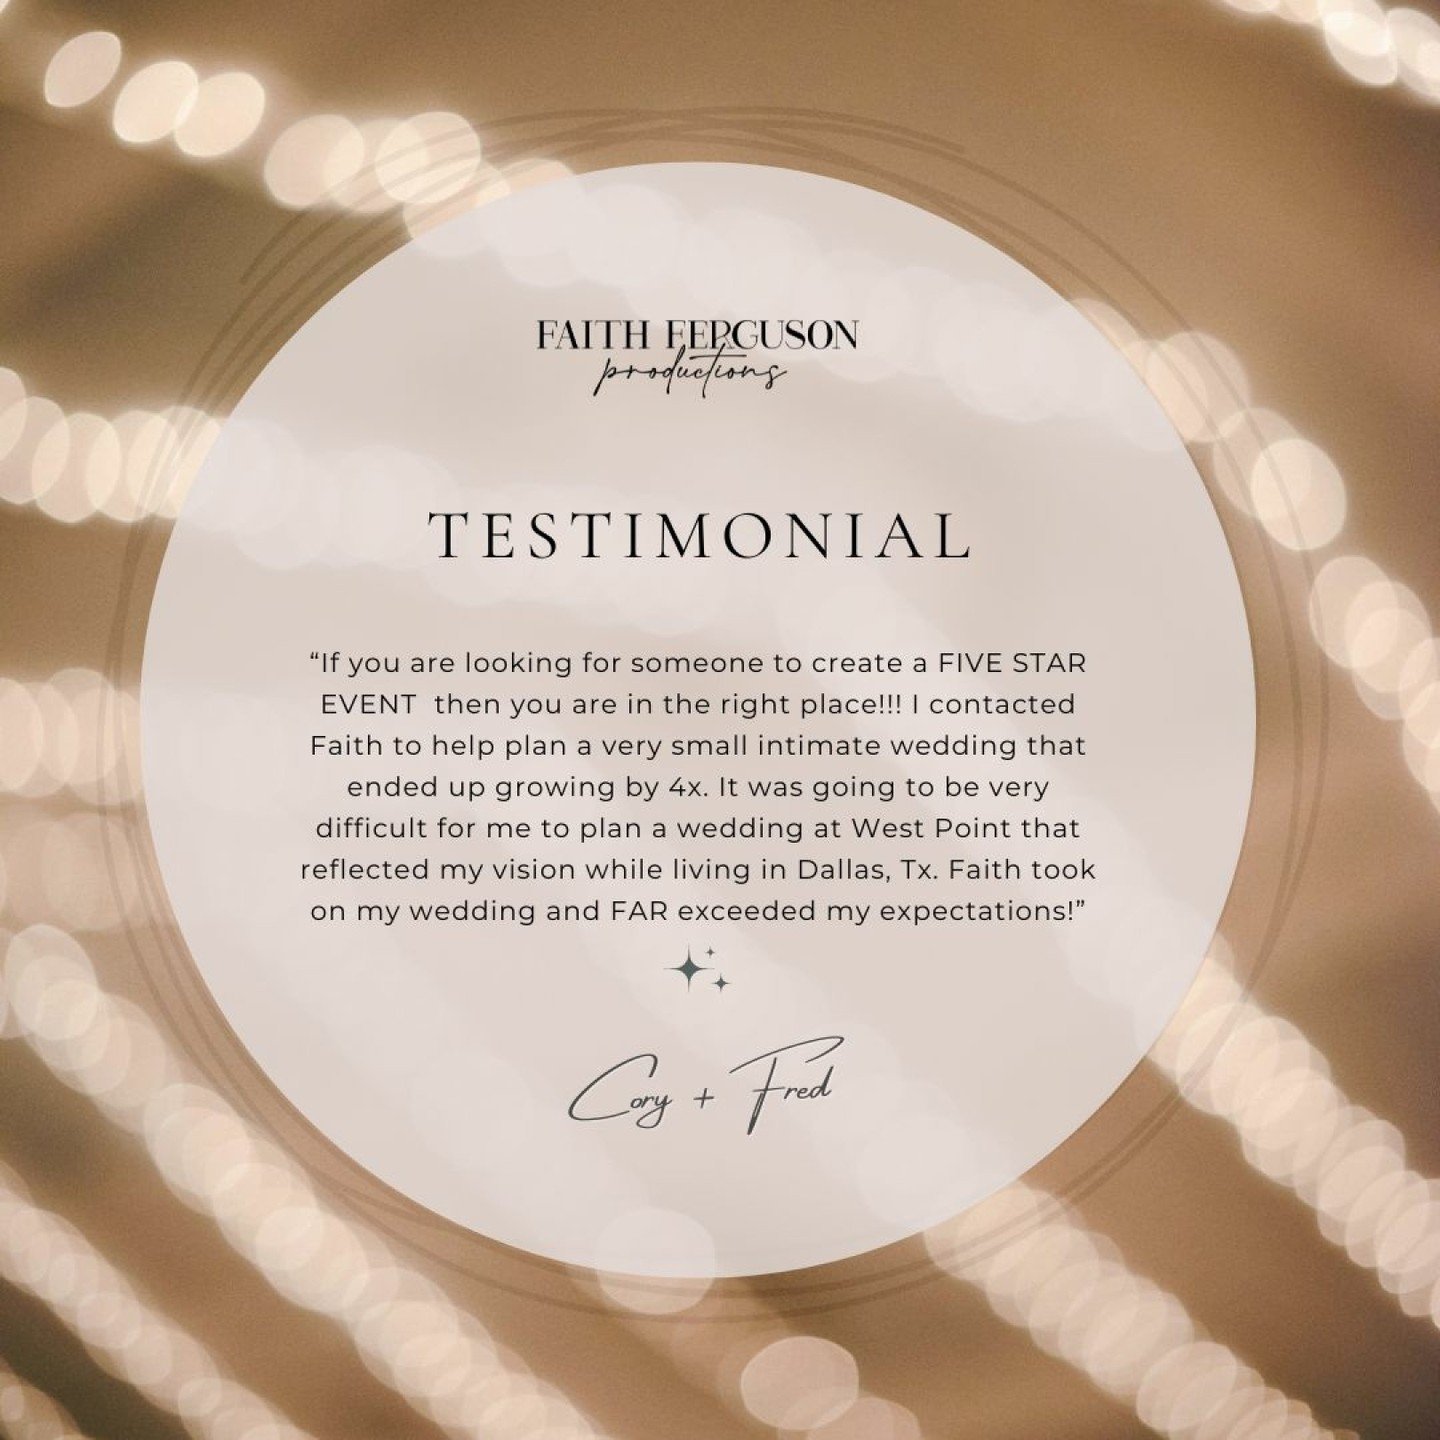 Testimonial Tuesday! A huge thank you goes out to our incredible clients for their invaluable support, driving FFP forward!✨
*
*
*
*
*
#faithfergusonproductions #hudsonvalley #hudsonvalleyweddingplanner #weddingplanner #nyweddingplanner #2025brides #